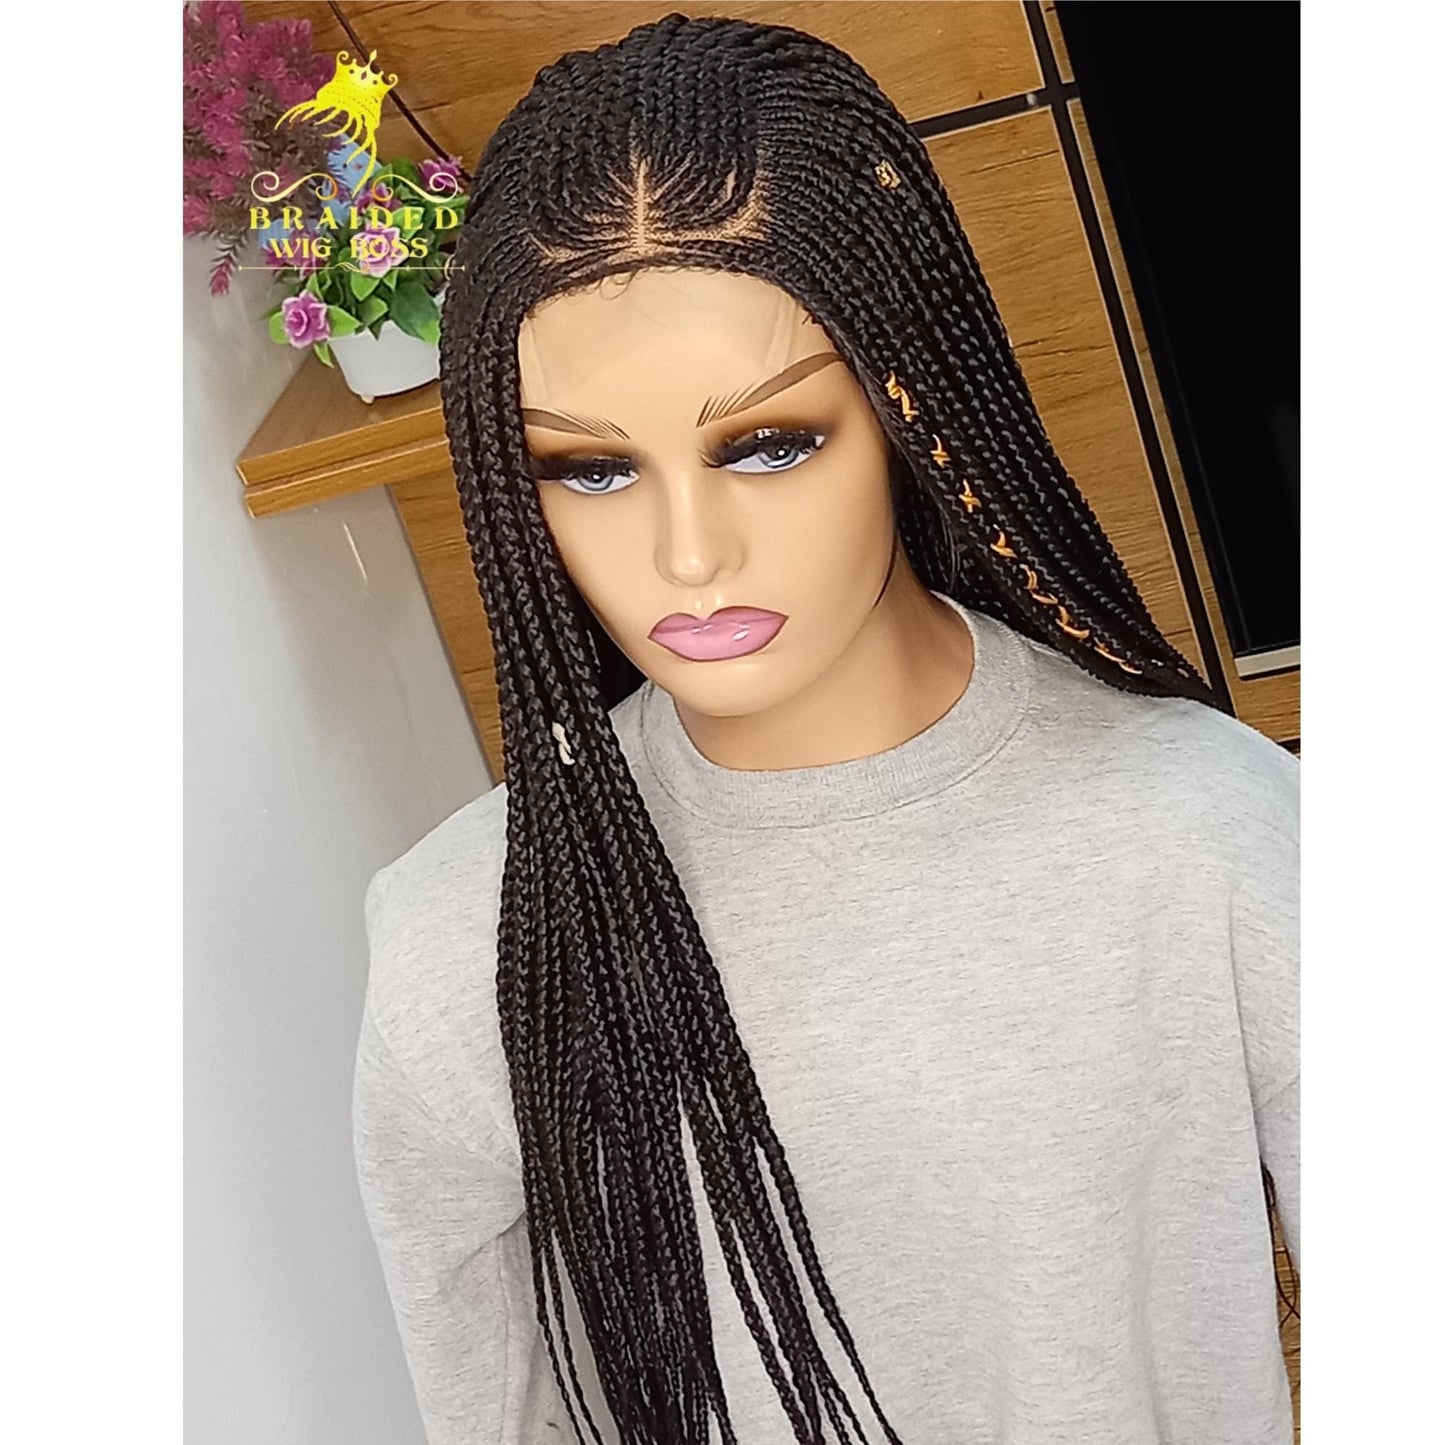 Cornrow Wig on 4x4 Lace Front 30" Long Box Braid Braided Wig for Black Women in Color 2 Handmade Protective Hairstyle Natural Looking Braids